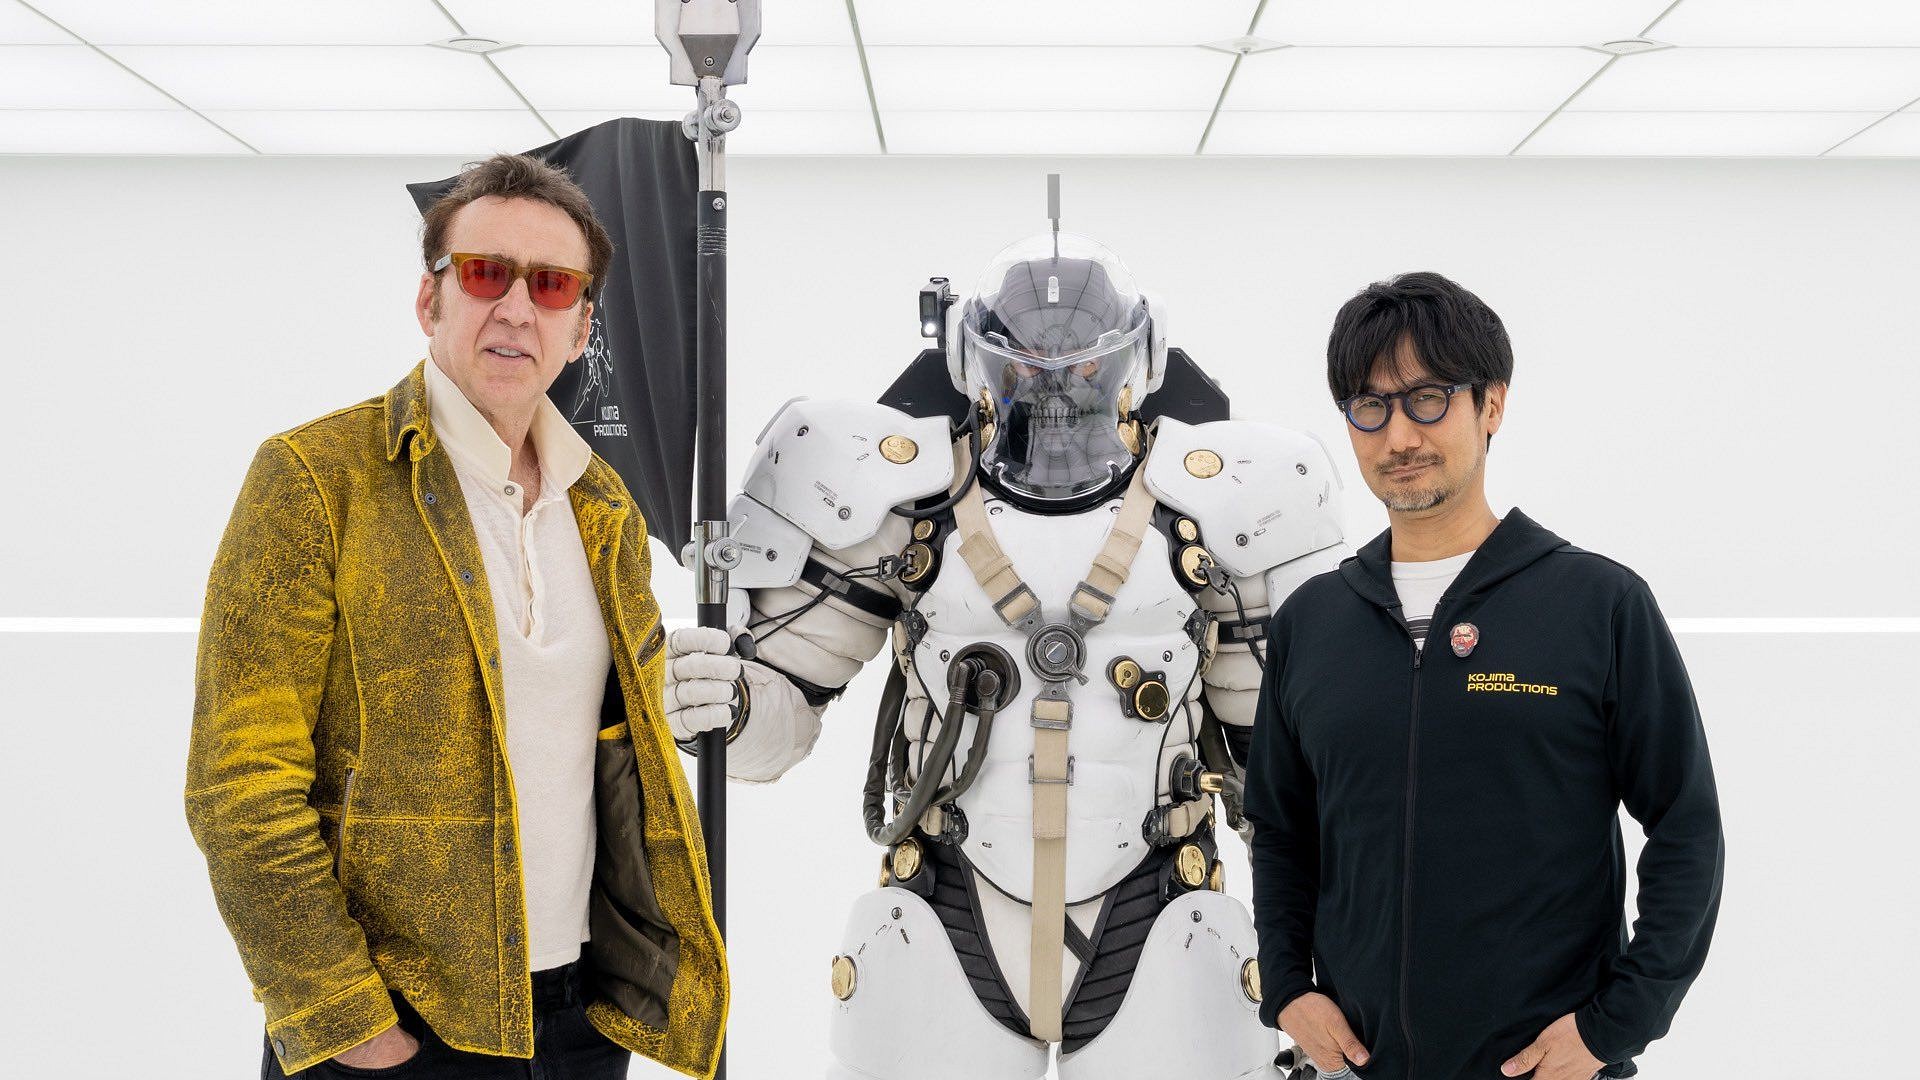 Latest Death Stranding 2 rumors suggests Keanu Reeves to star in Hideo  Kojima's upcoming game - The SportsRush